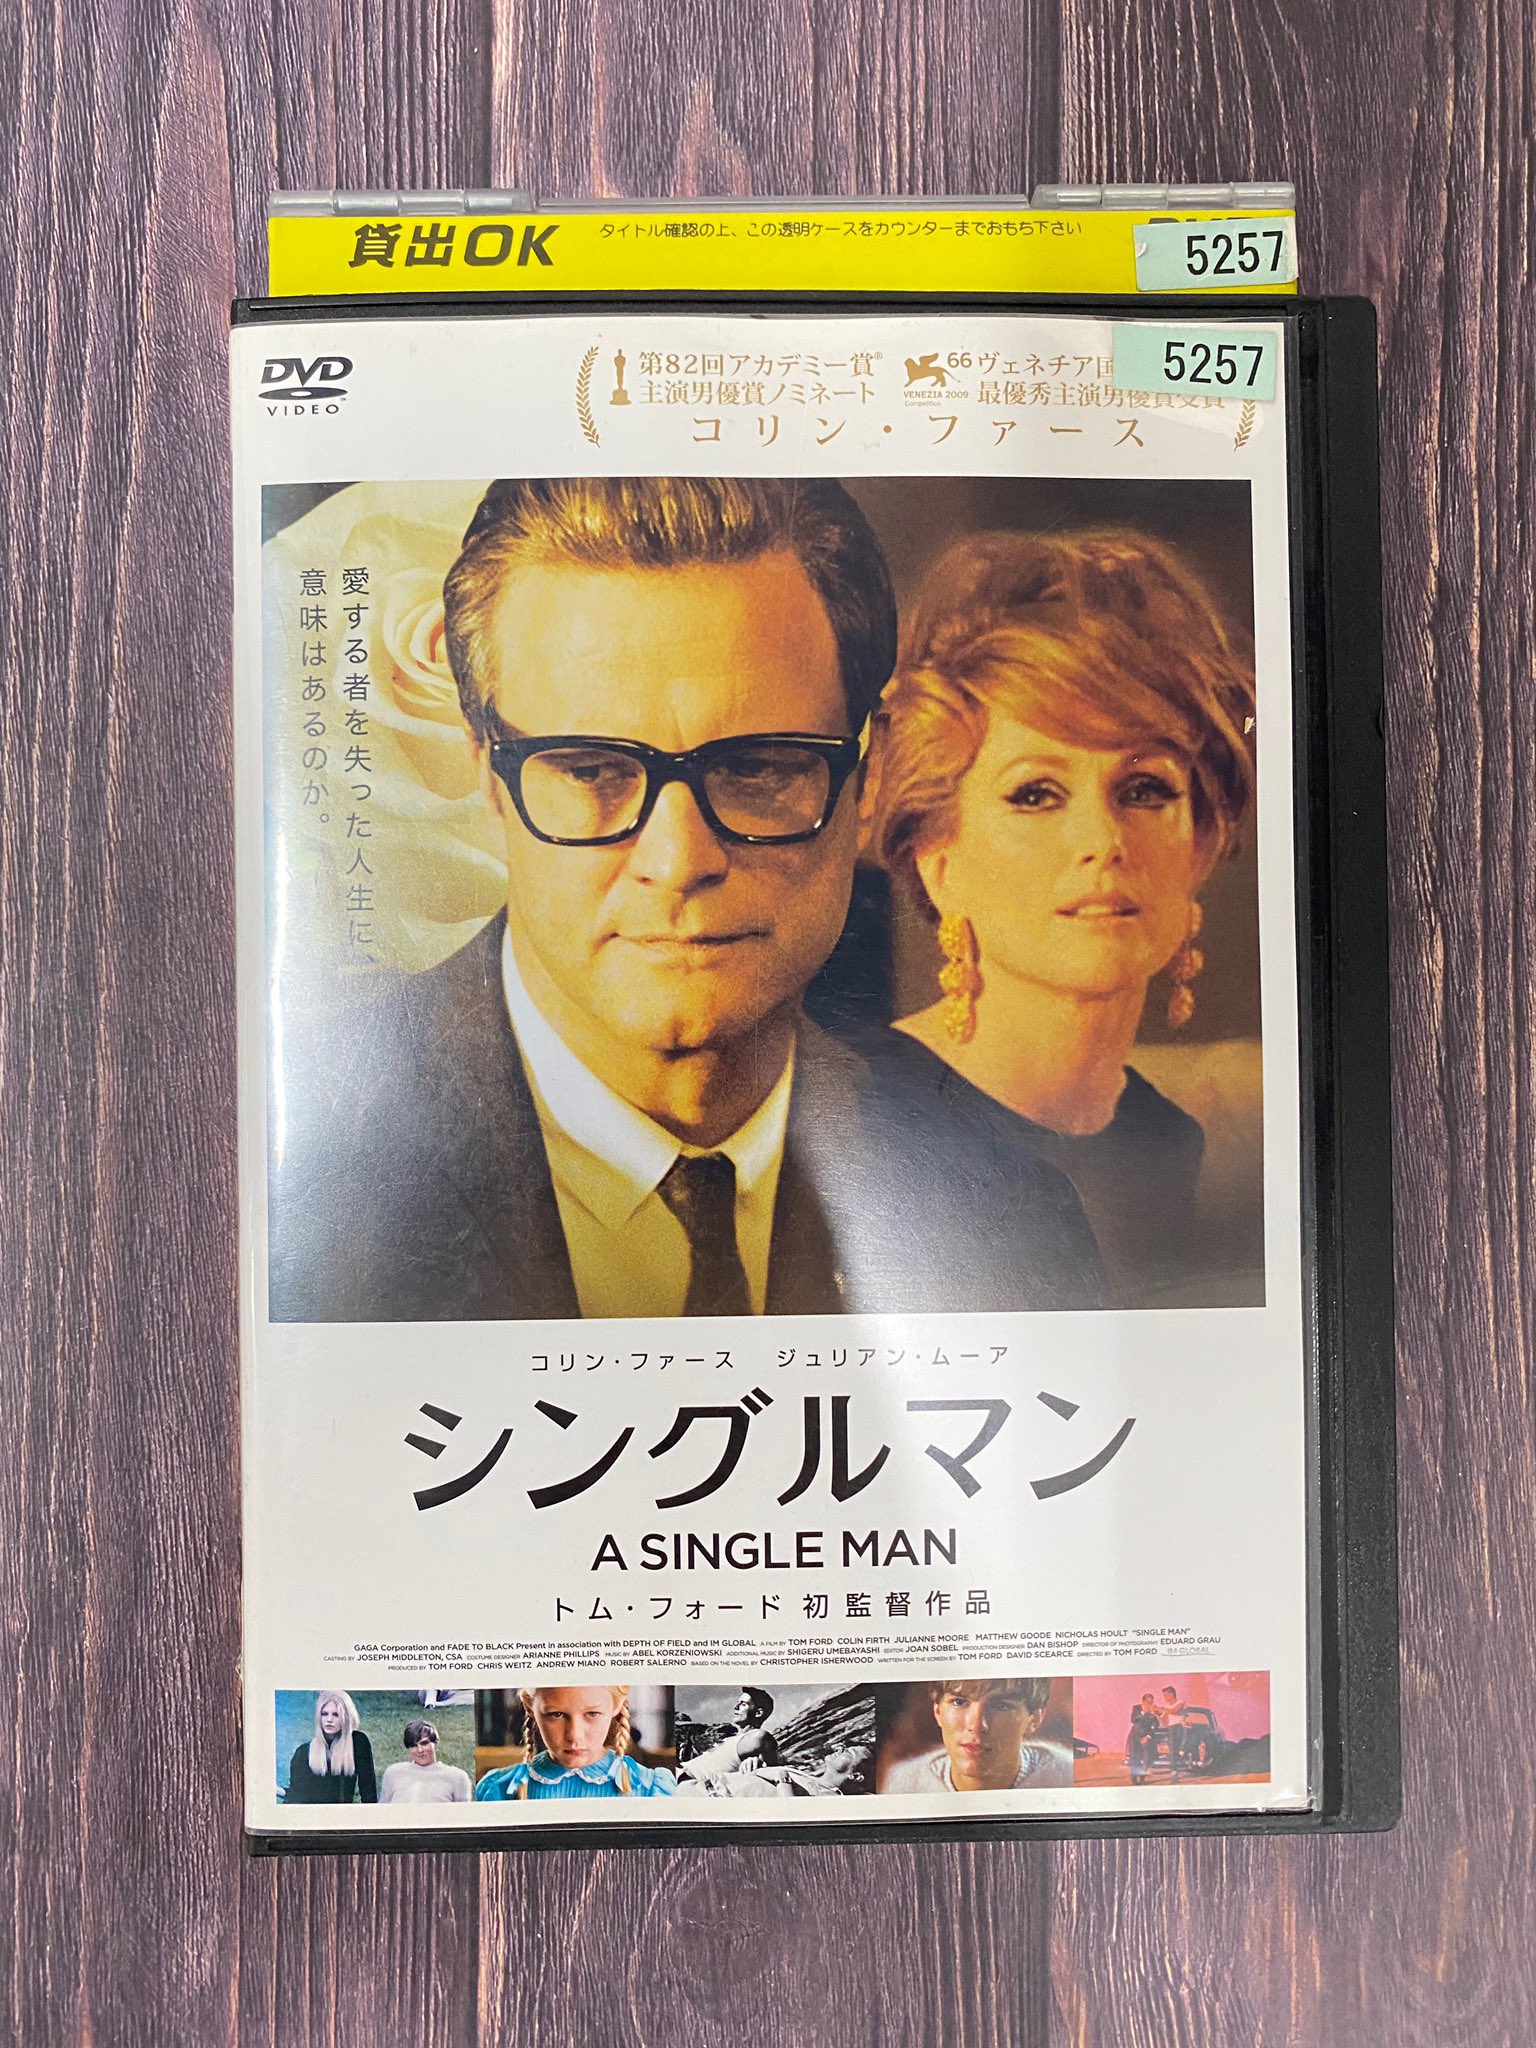 Movies Delight Delight Recommend Movie シングルマン 監督 トム フォード 公開年 09年 アメリカ 99分 シングルマン トム フォード T Co Womqxea4bf Twitter